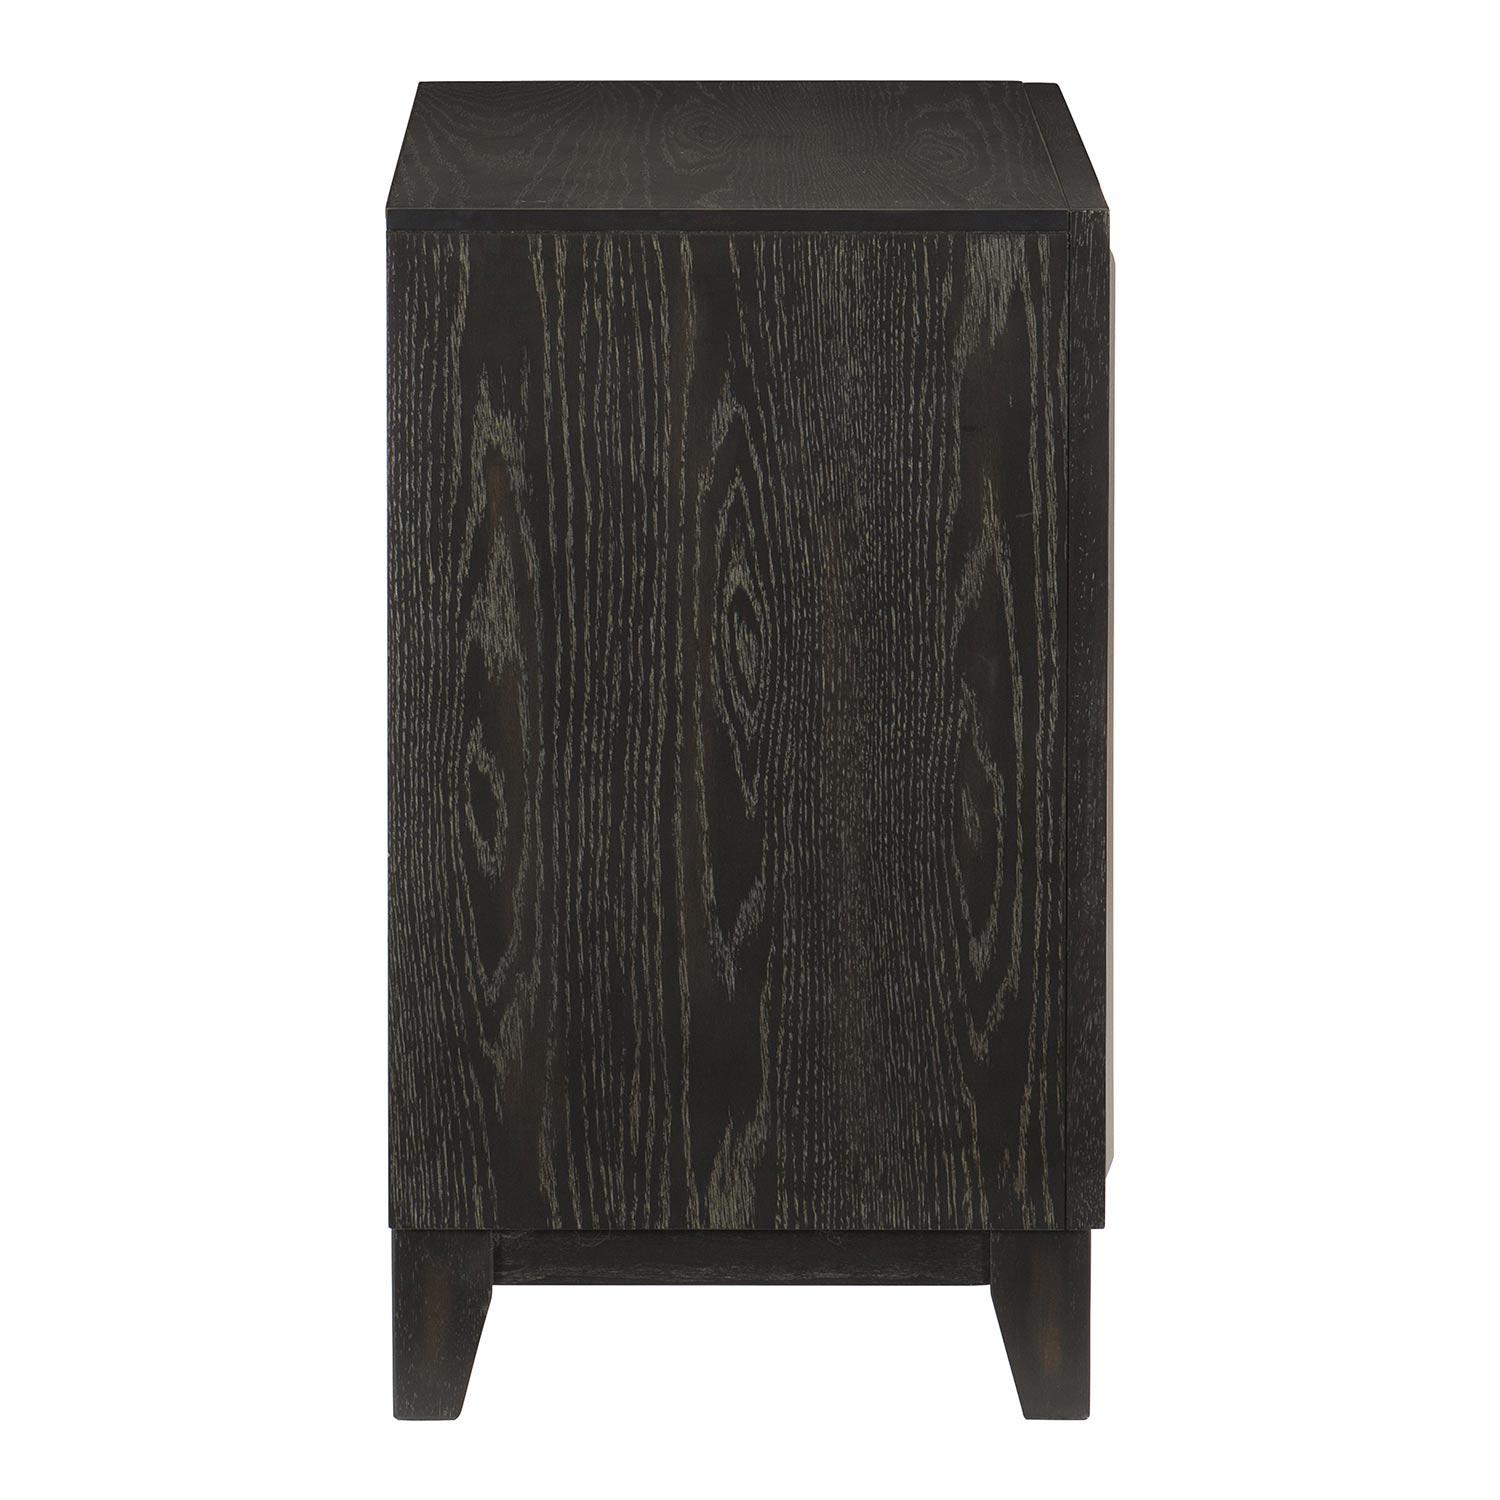 Homelegance Grant Night Stand - Ebony and Silver